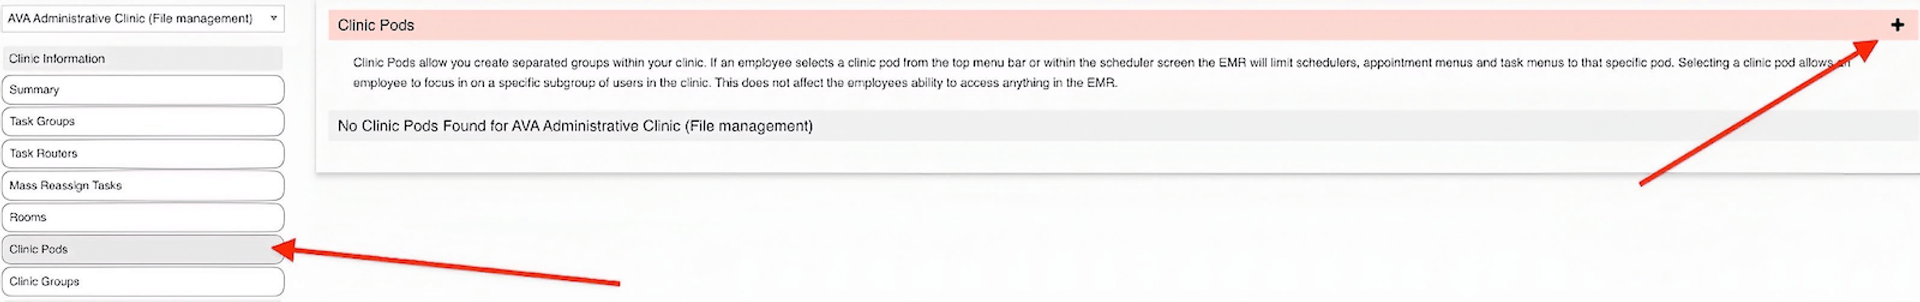 Clinic Pods page with red arrows pointing at a 'Clinic Pods' button and a 'Plus' button